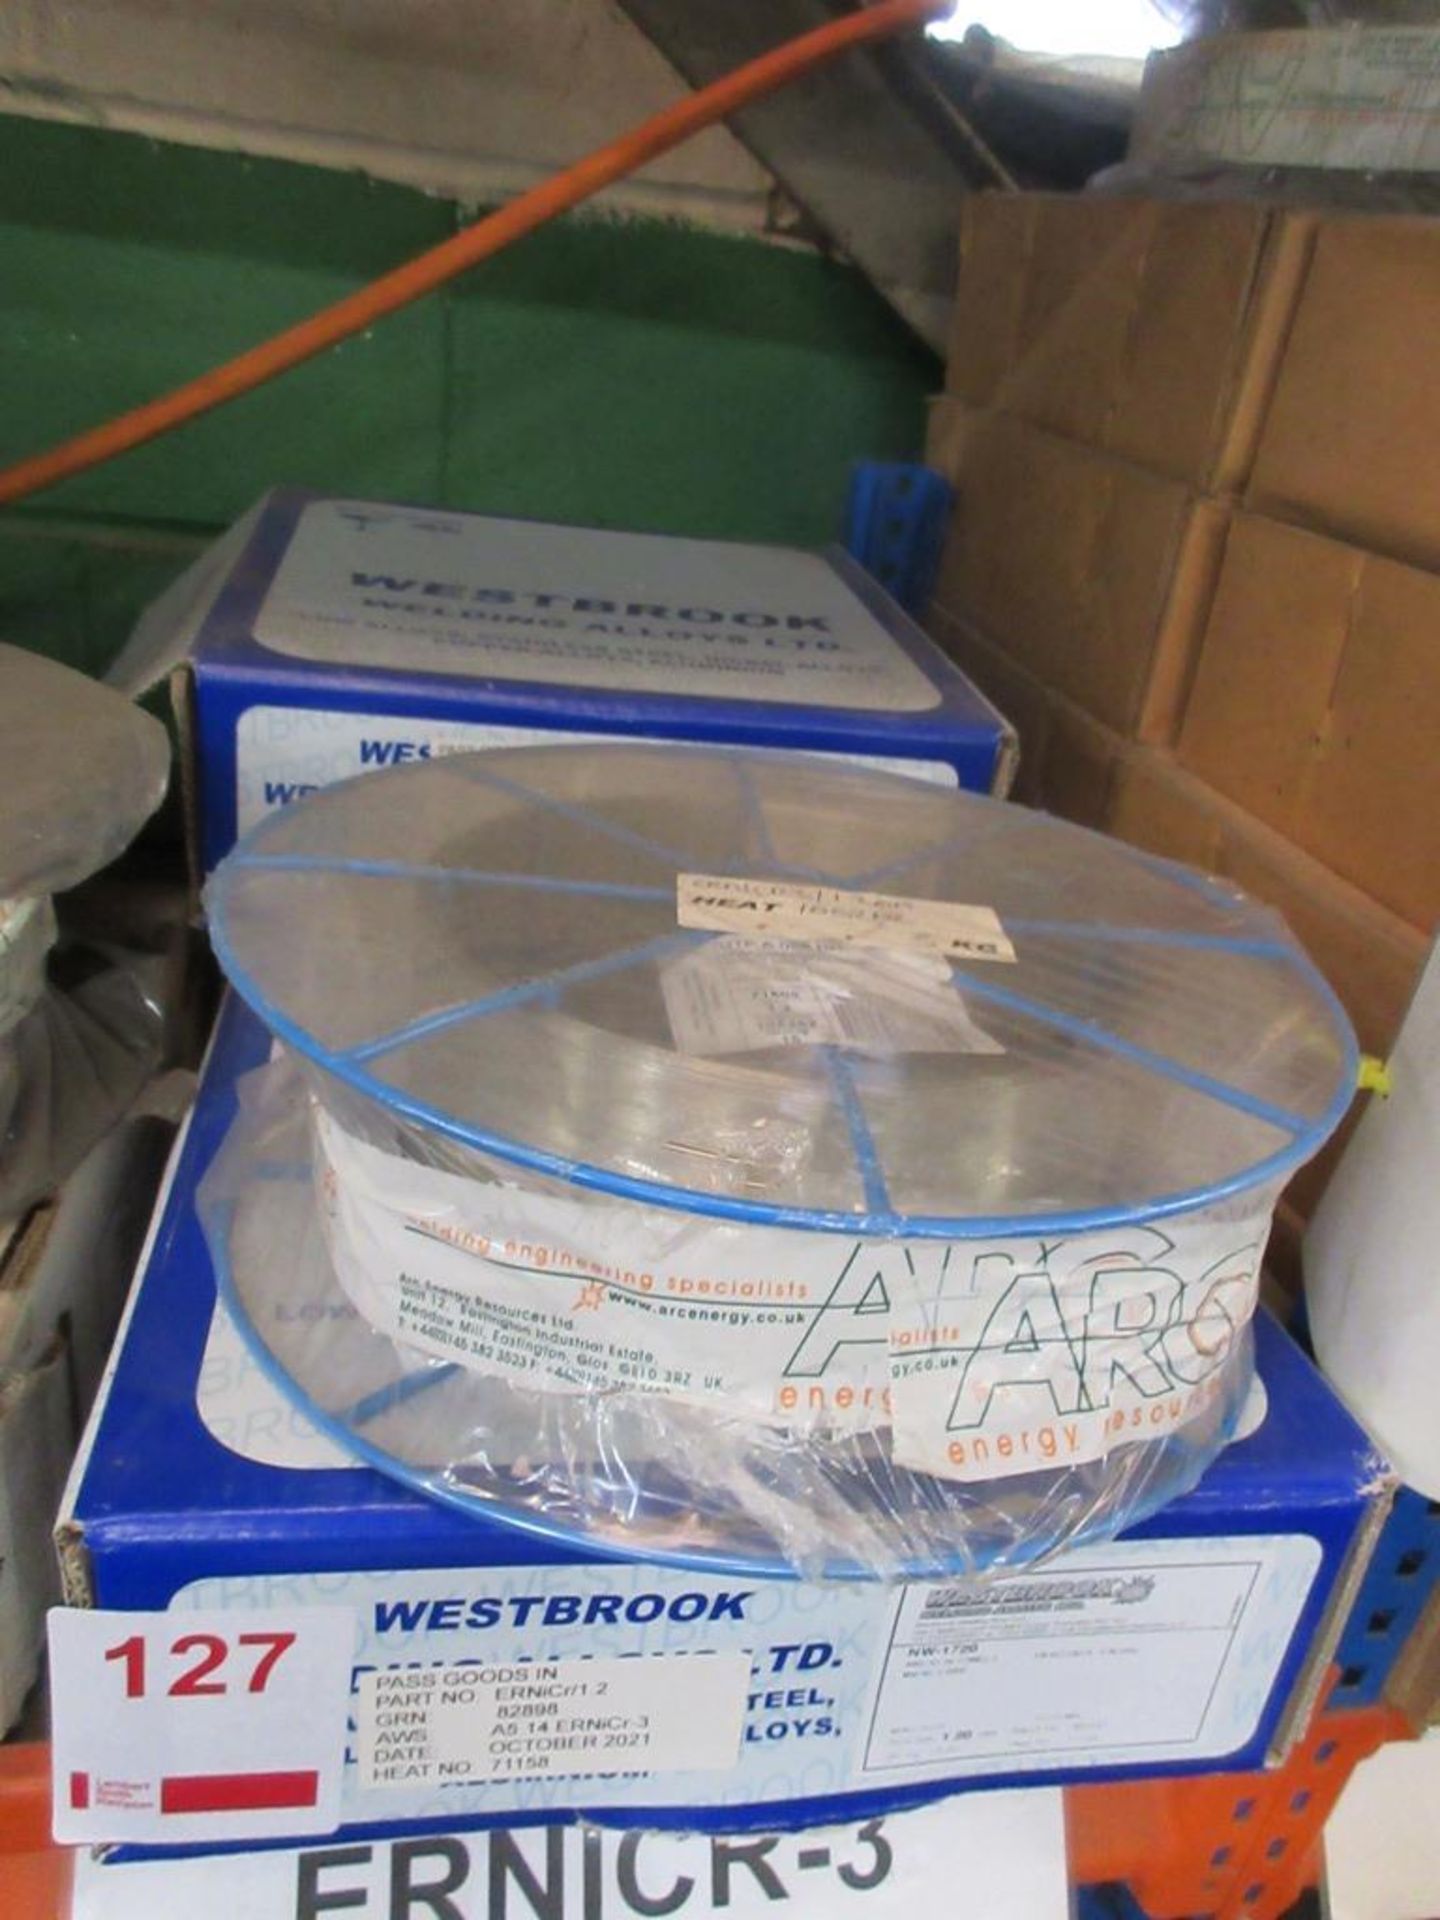 Four reels of NW-1720 nickel alloy filler wire, part no. ERN1CR/1.2